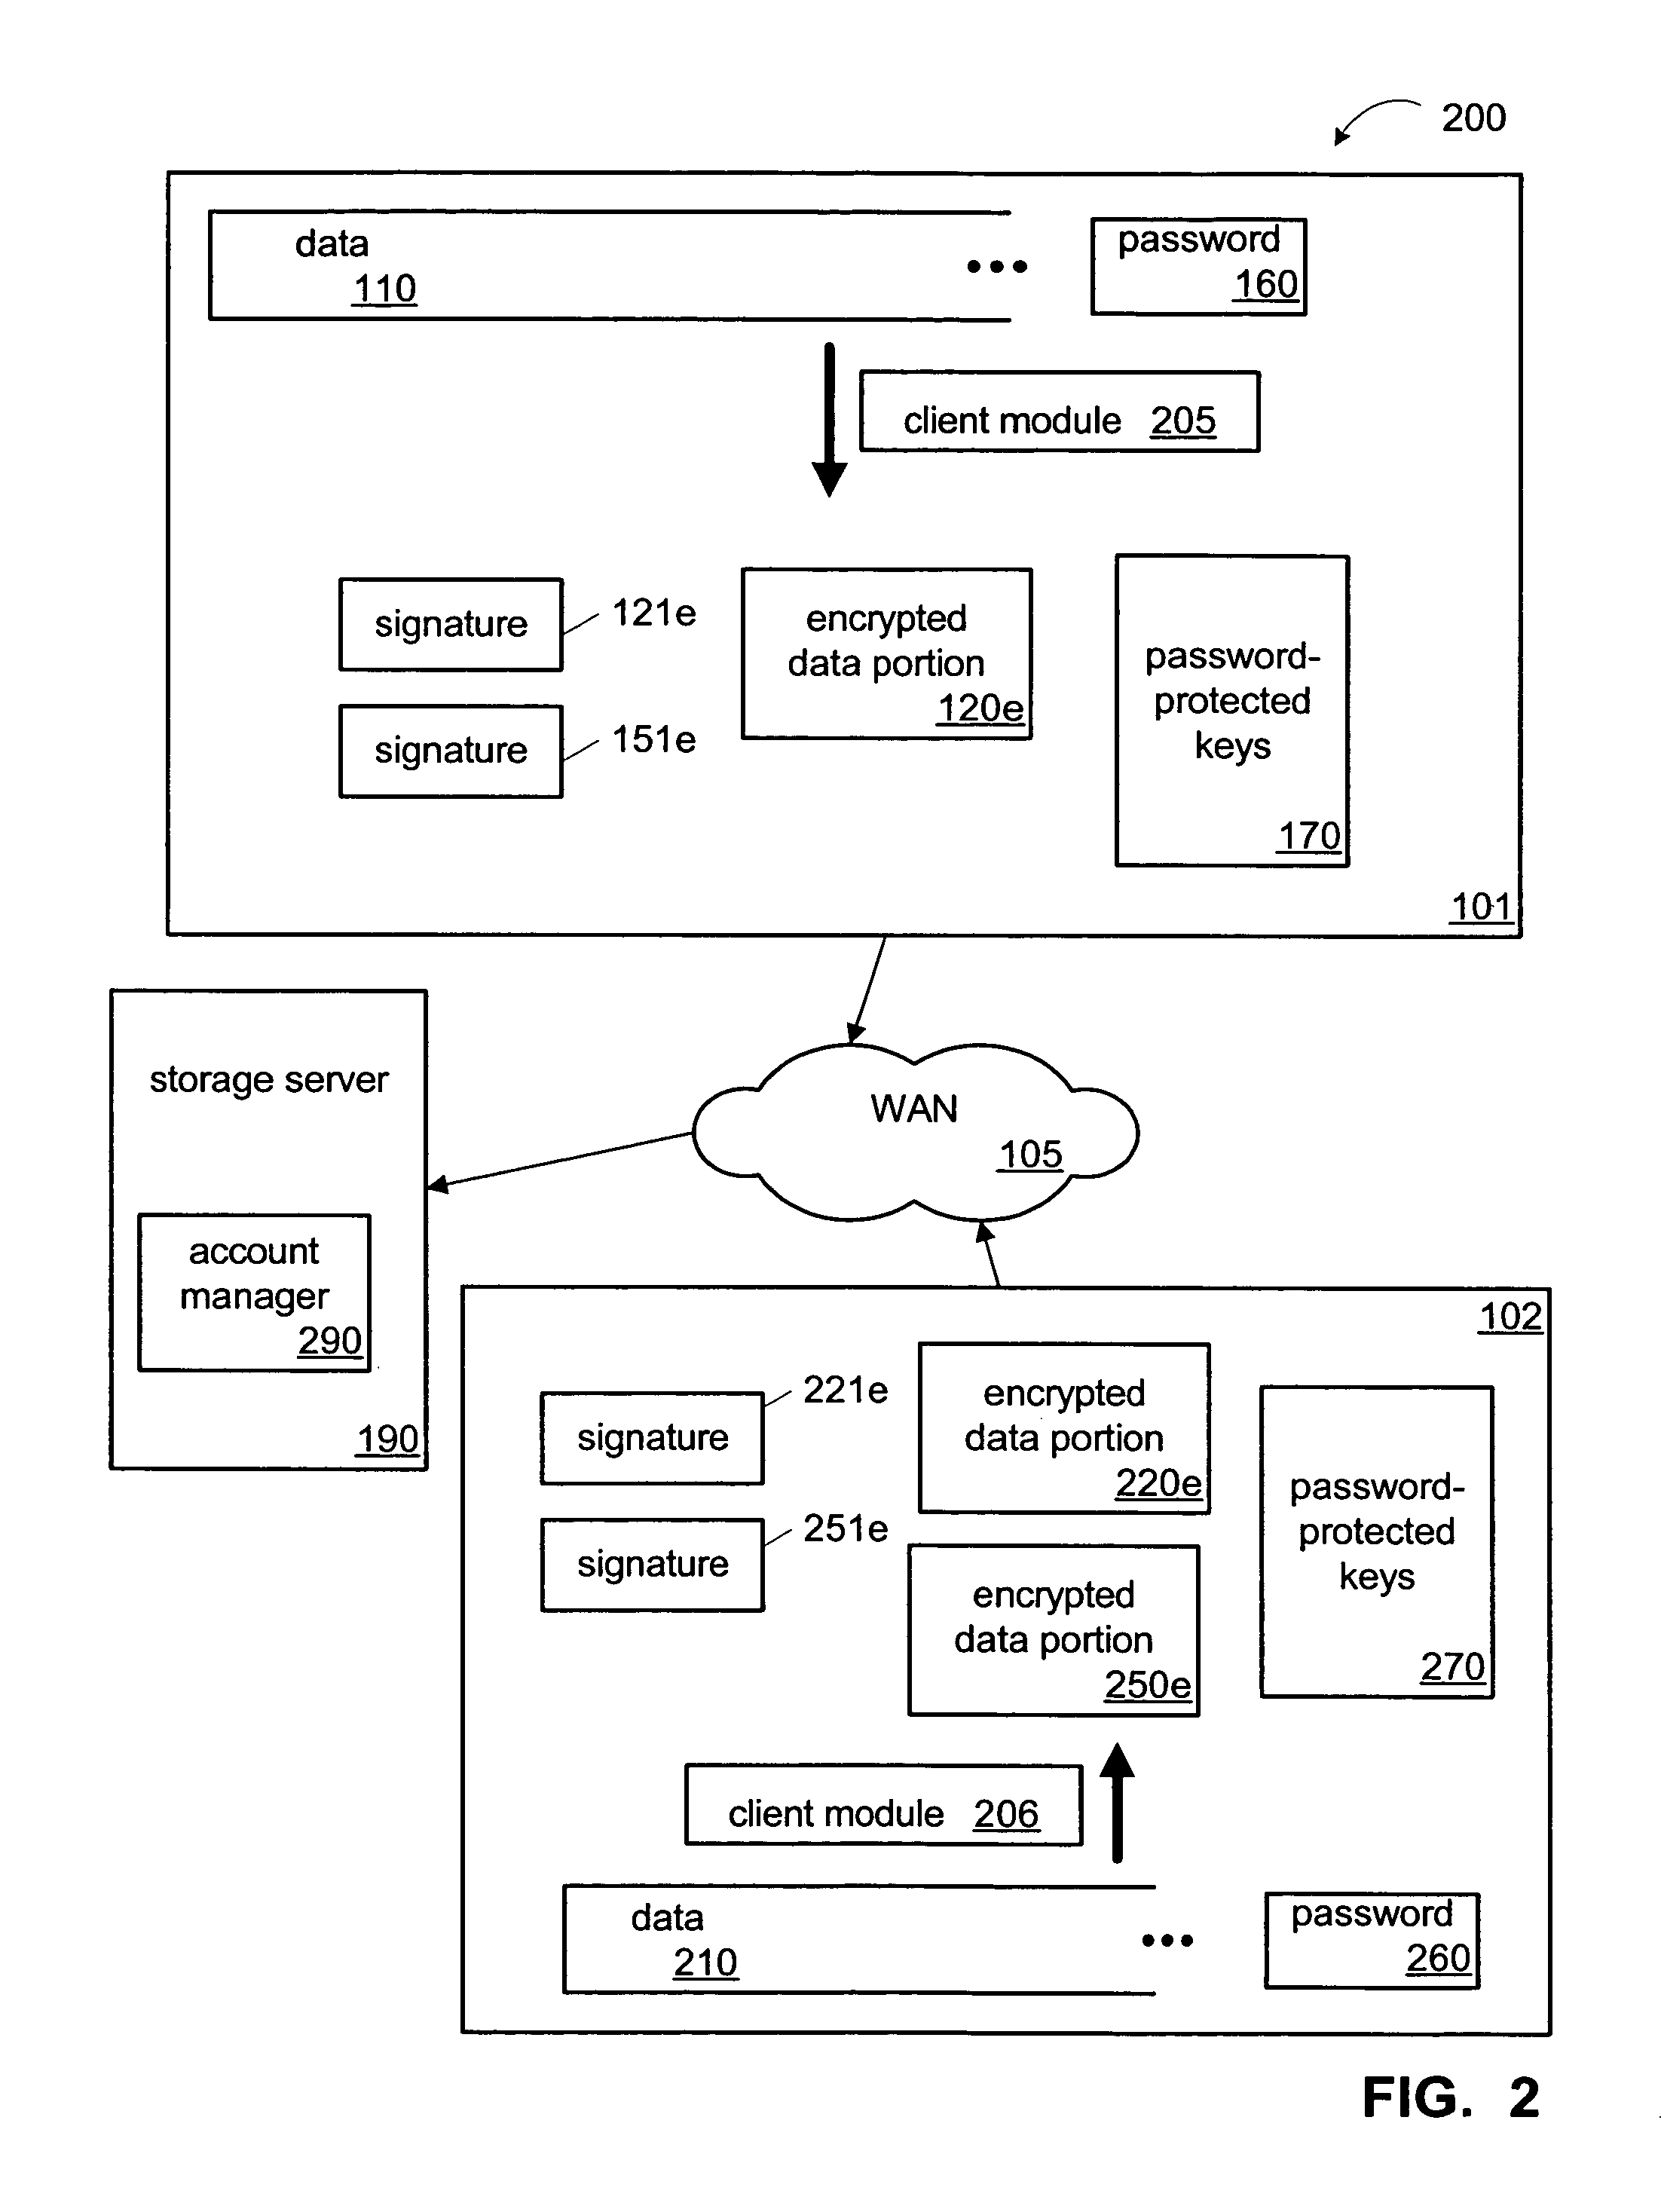 Backup service and appliance with single-instance storage of encrypted data